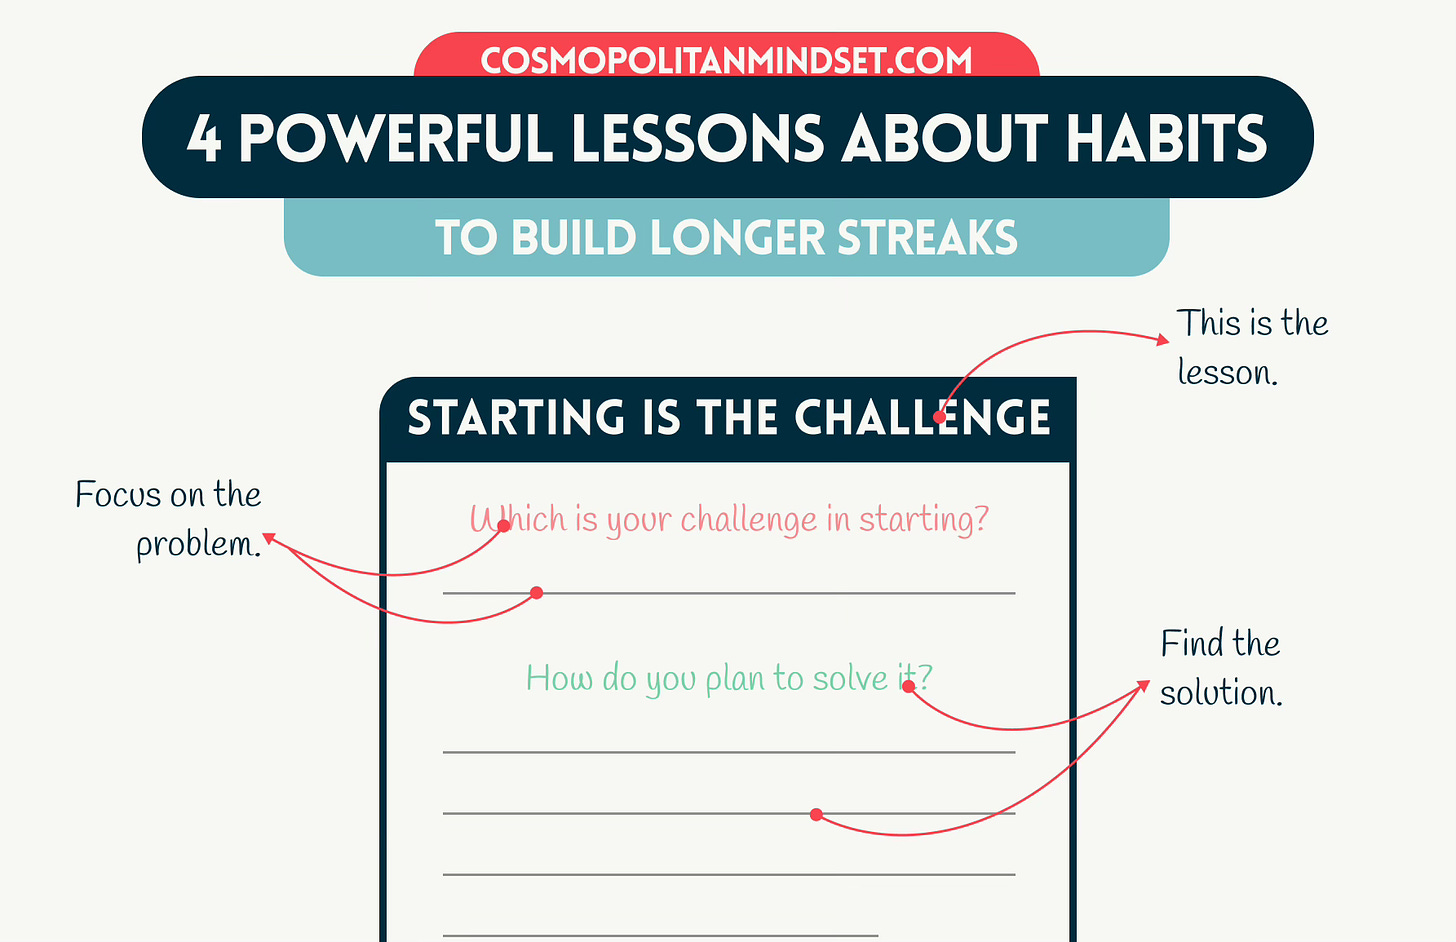 Instructions for 4 Powerful Lessons About Habits to Build Longer Streaks